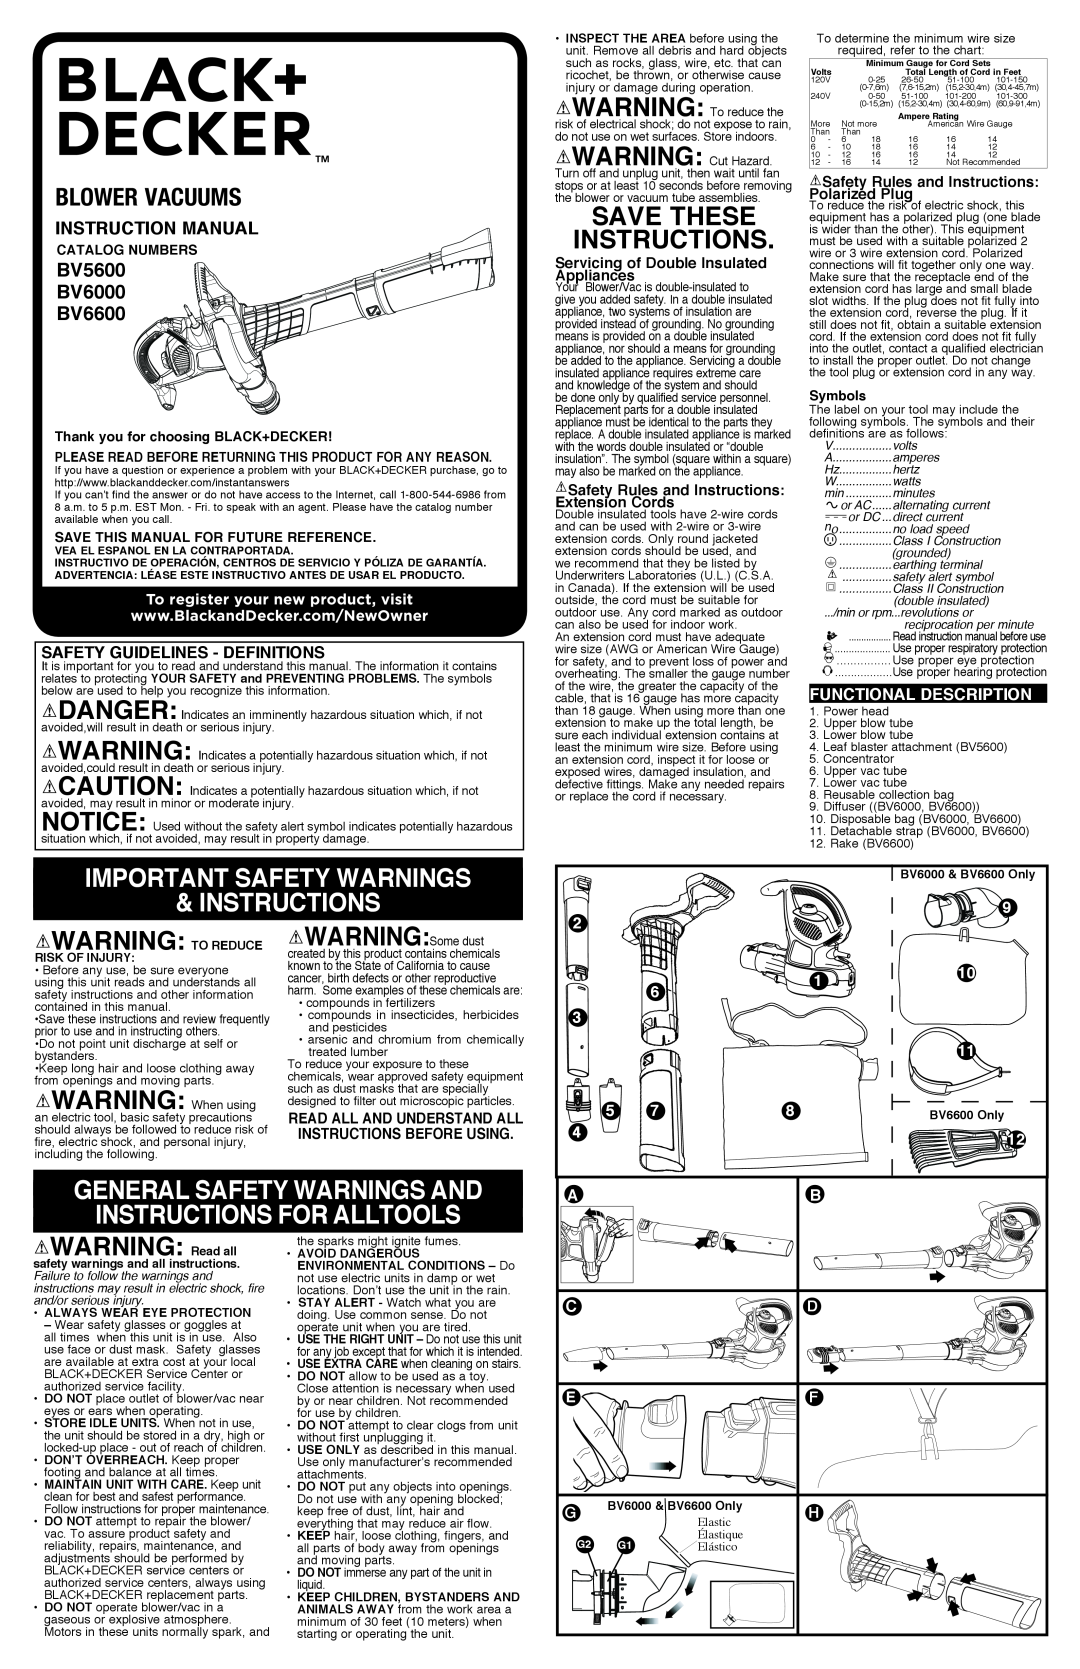 Black & Decker BV5600 instruction manual Save These Instructions, important Safety warnings instructions, WARNING Read all 